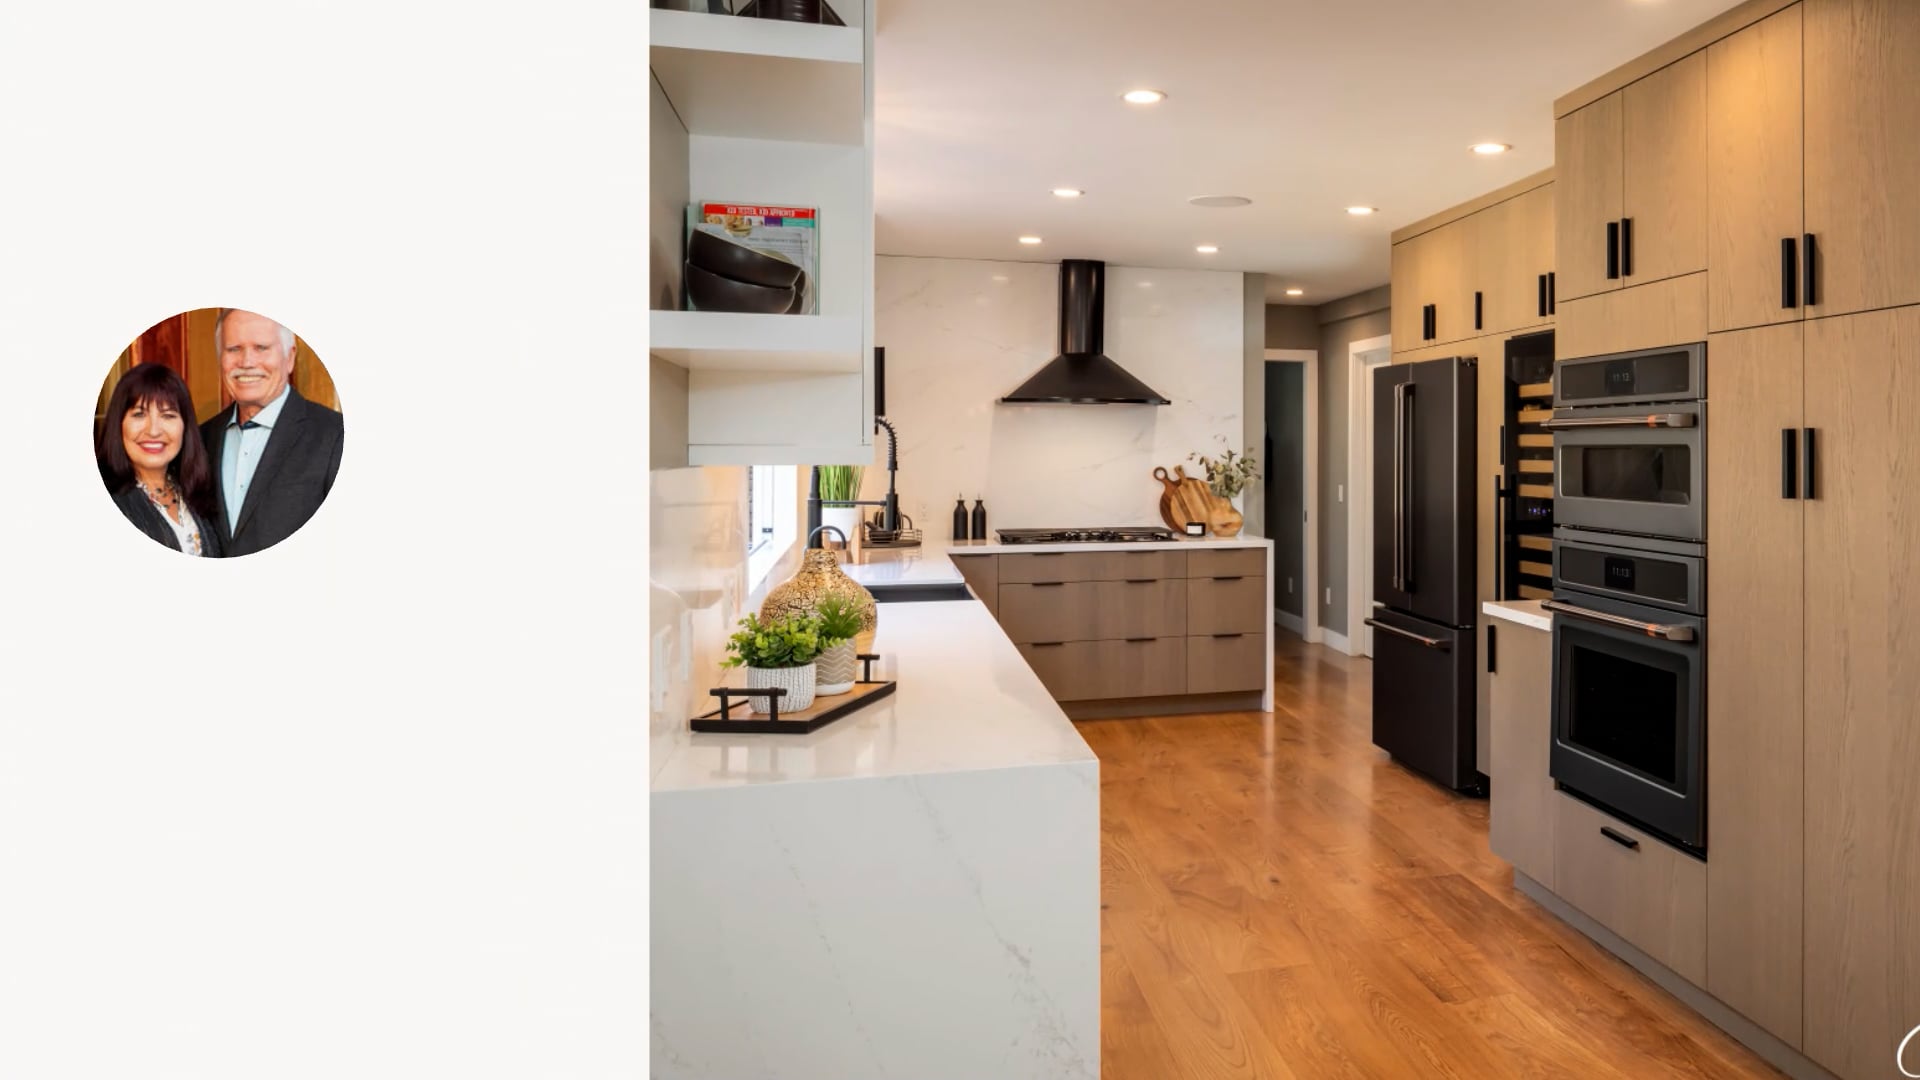 How to Remodel a Small Kitchen - Groysman Construction Remodeling